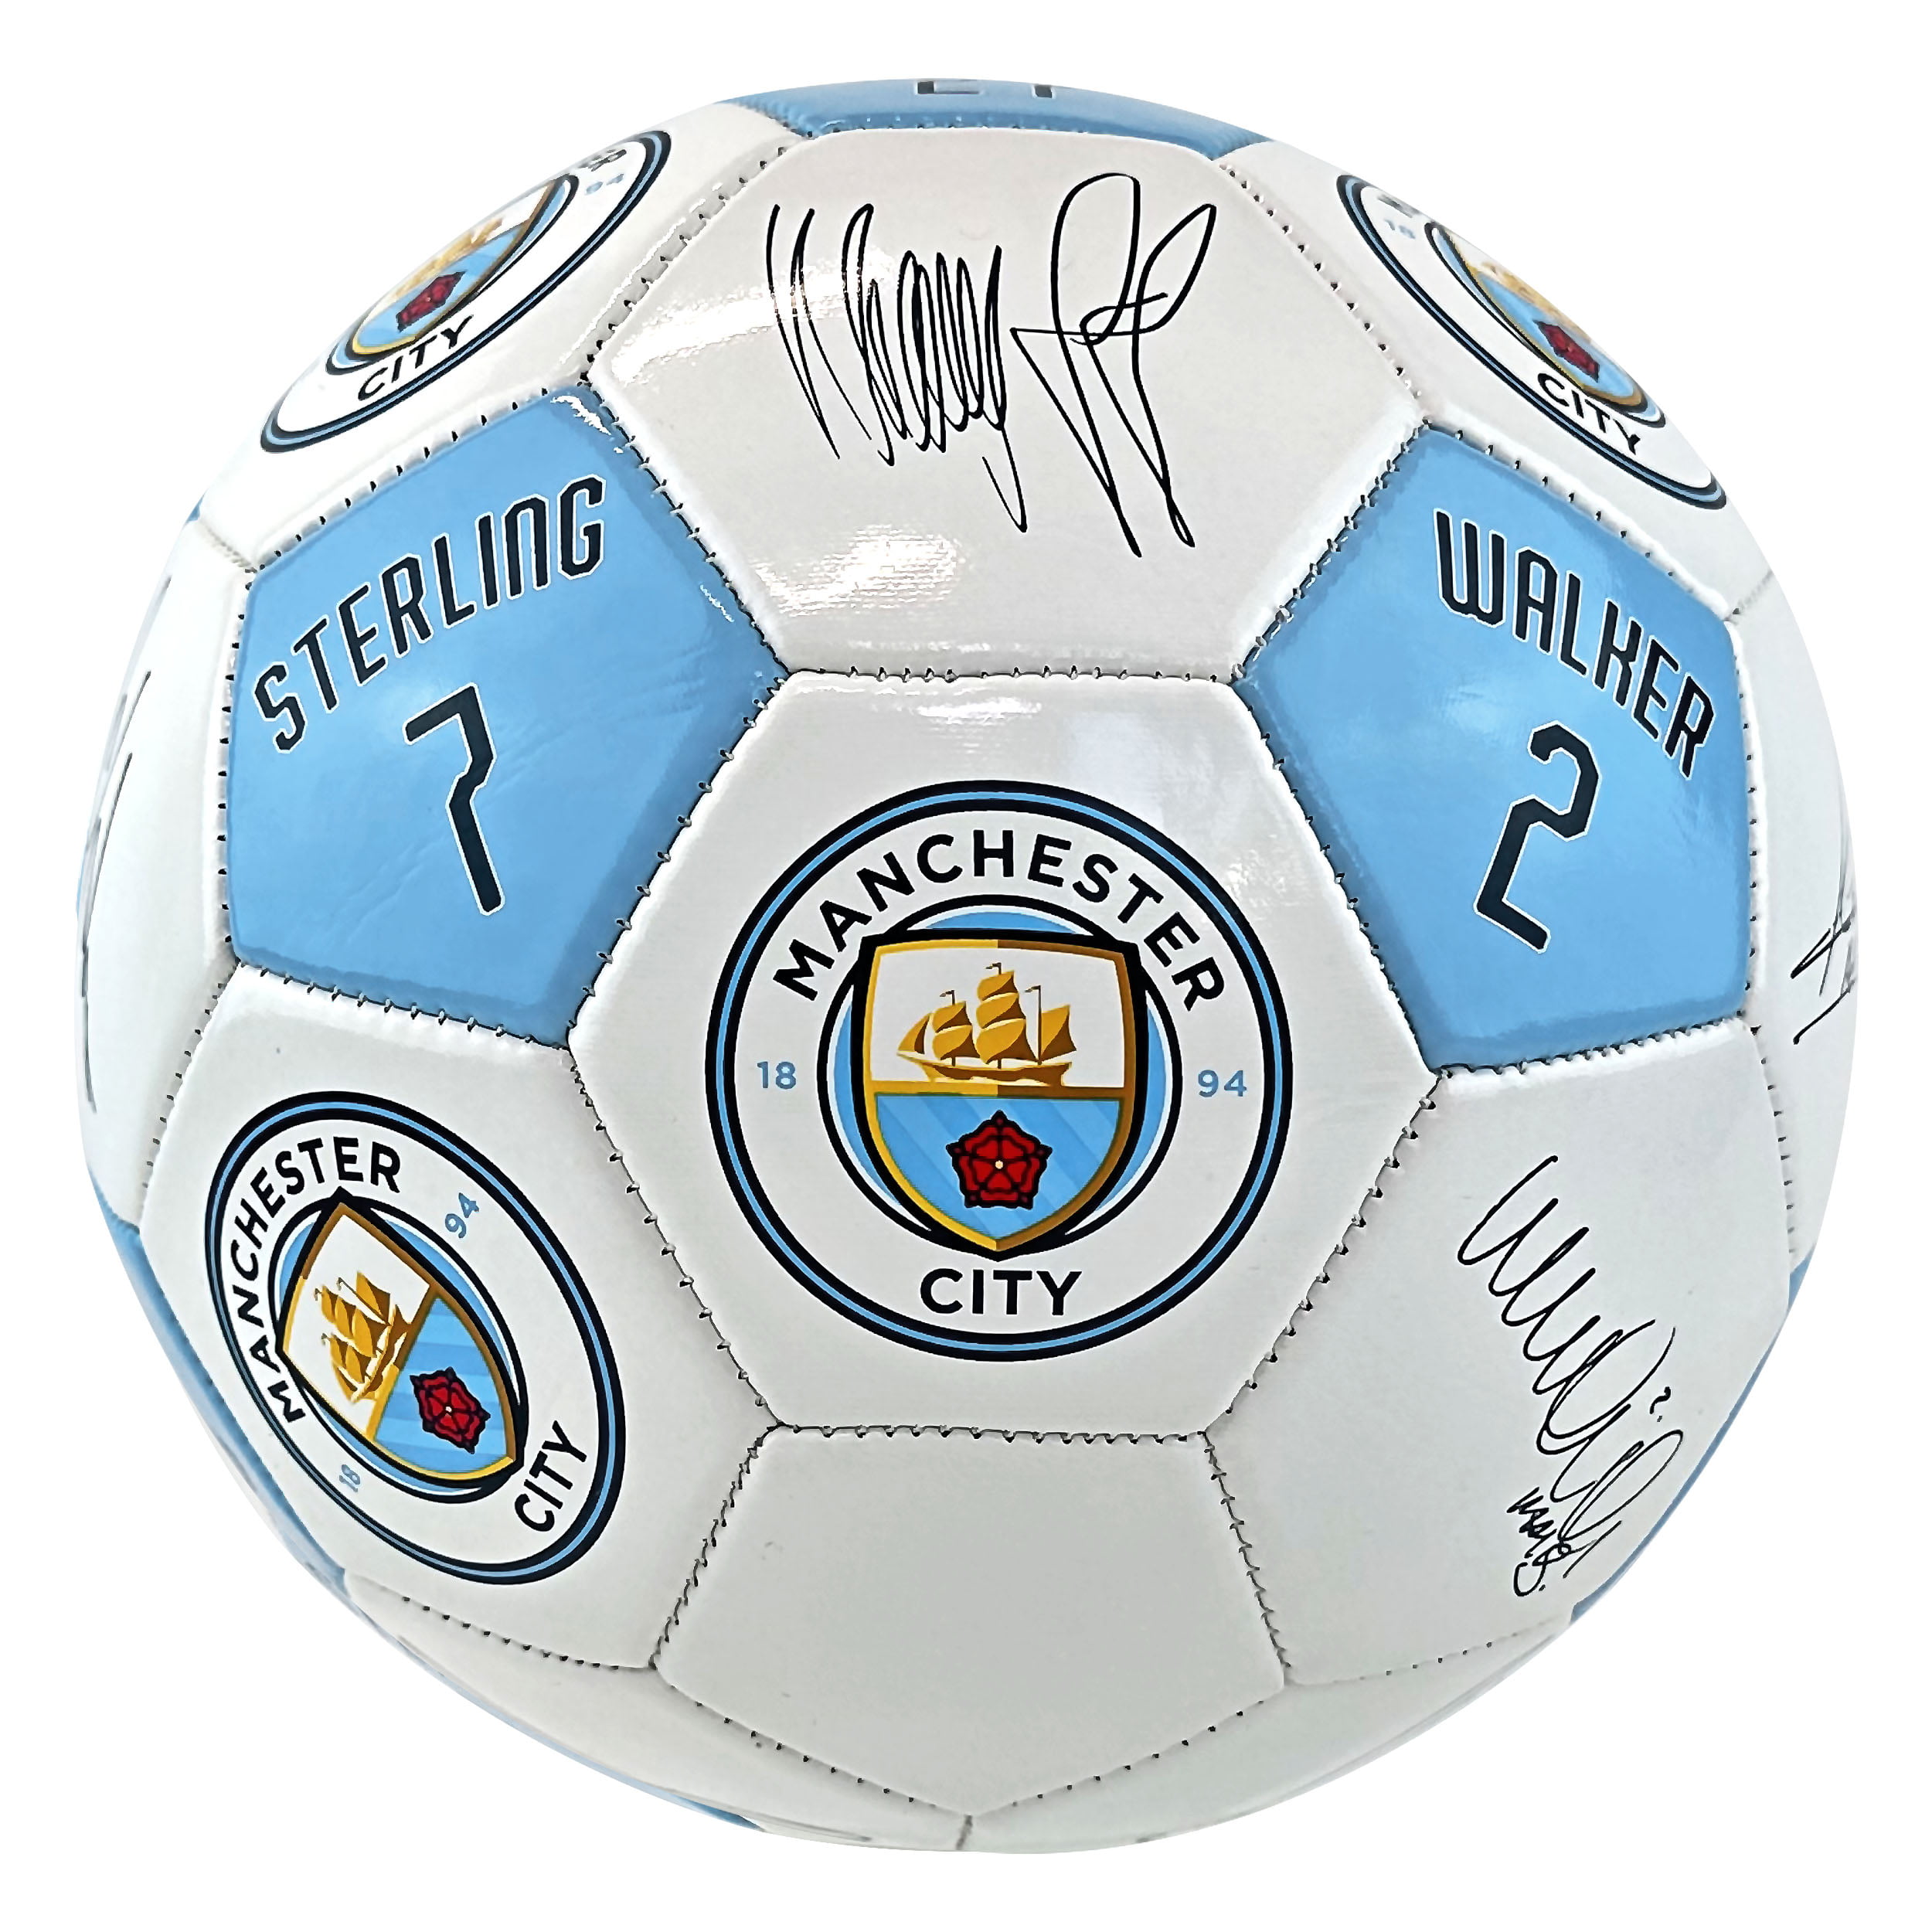 Maccabi Art Official Manchester City FC Soccer Ball with Player Signatures and Player Numbers, Size 5